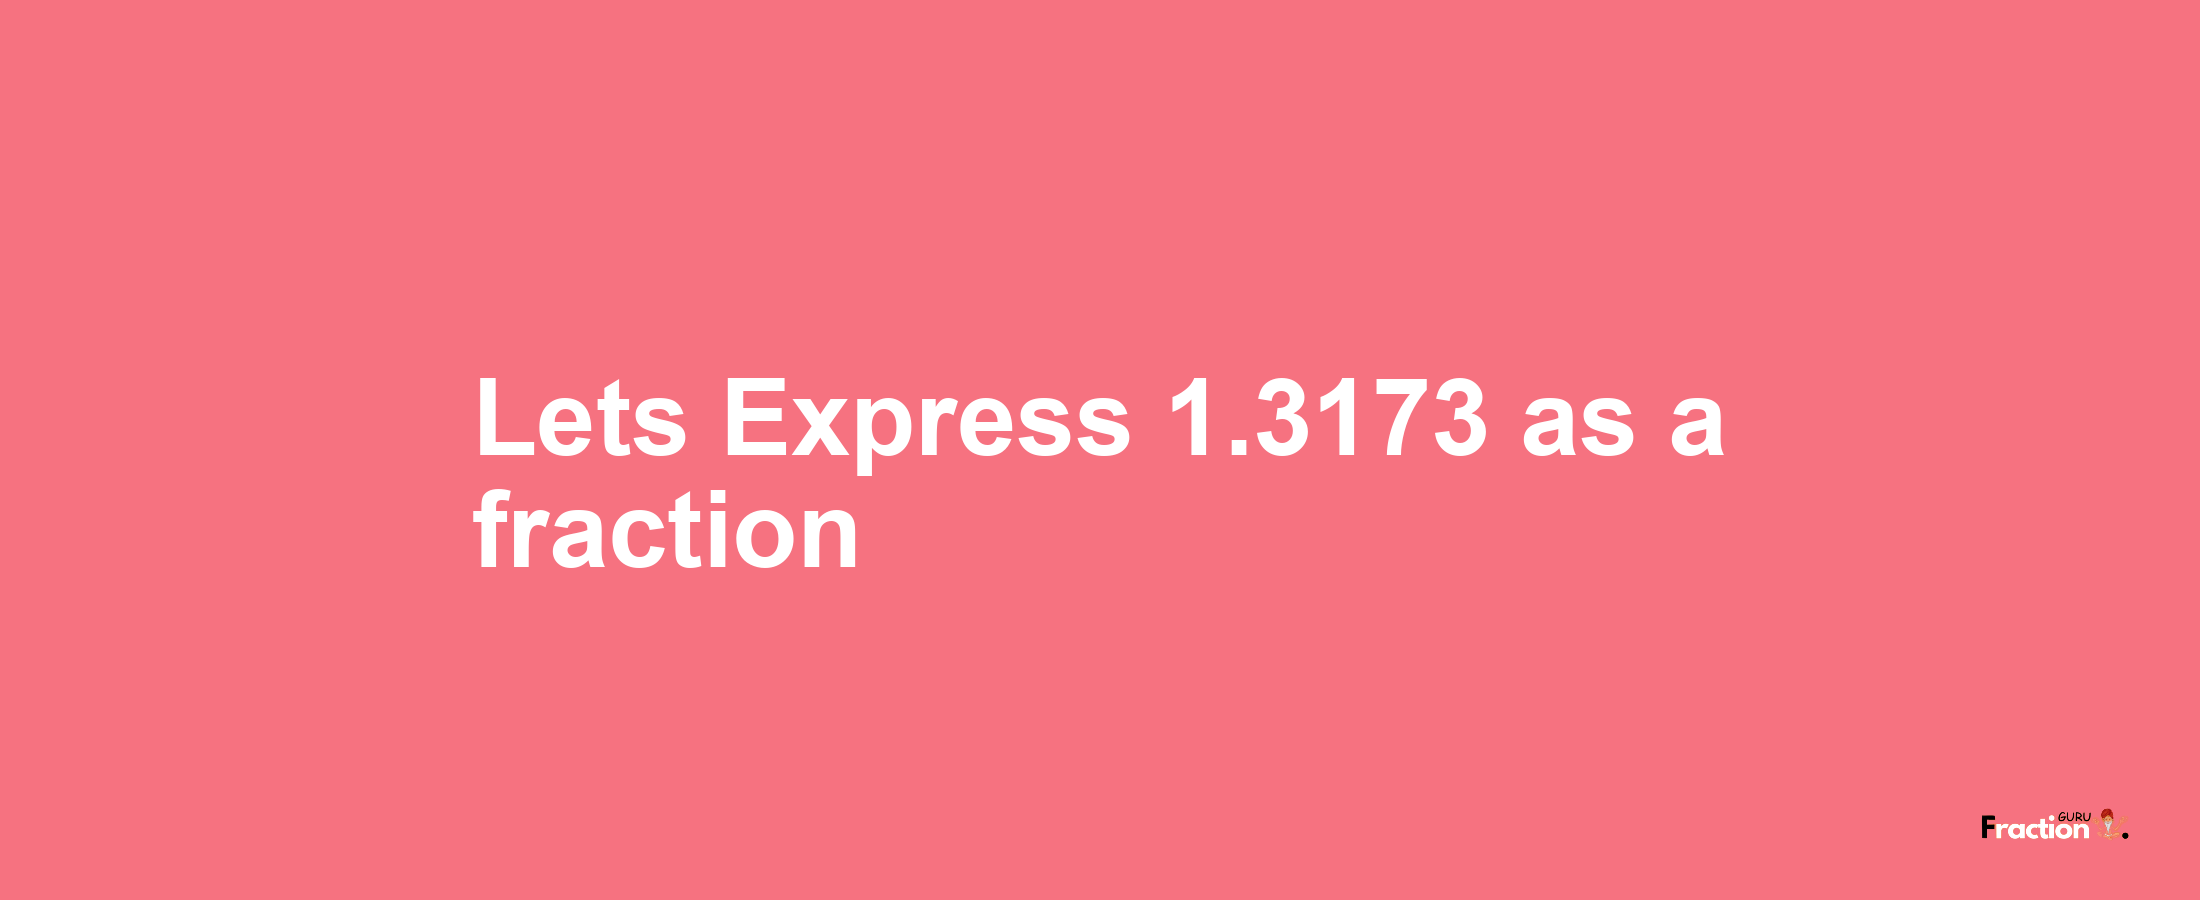 Lets Express 1.3173 as afraction